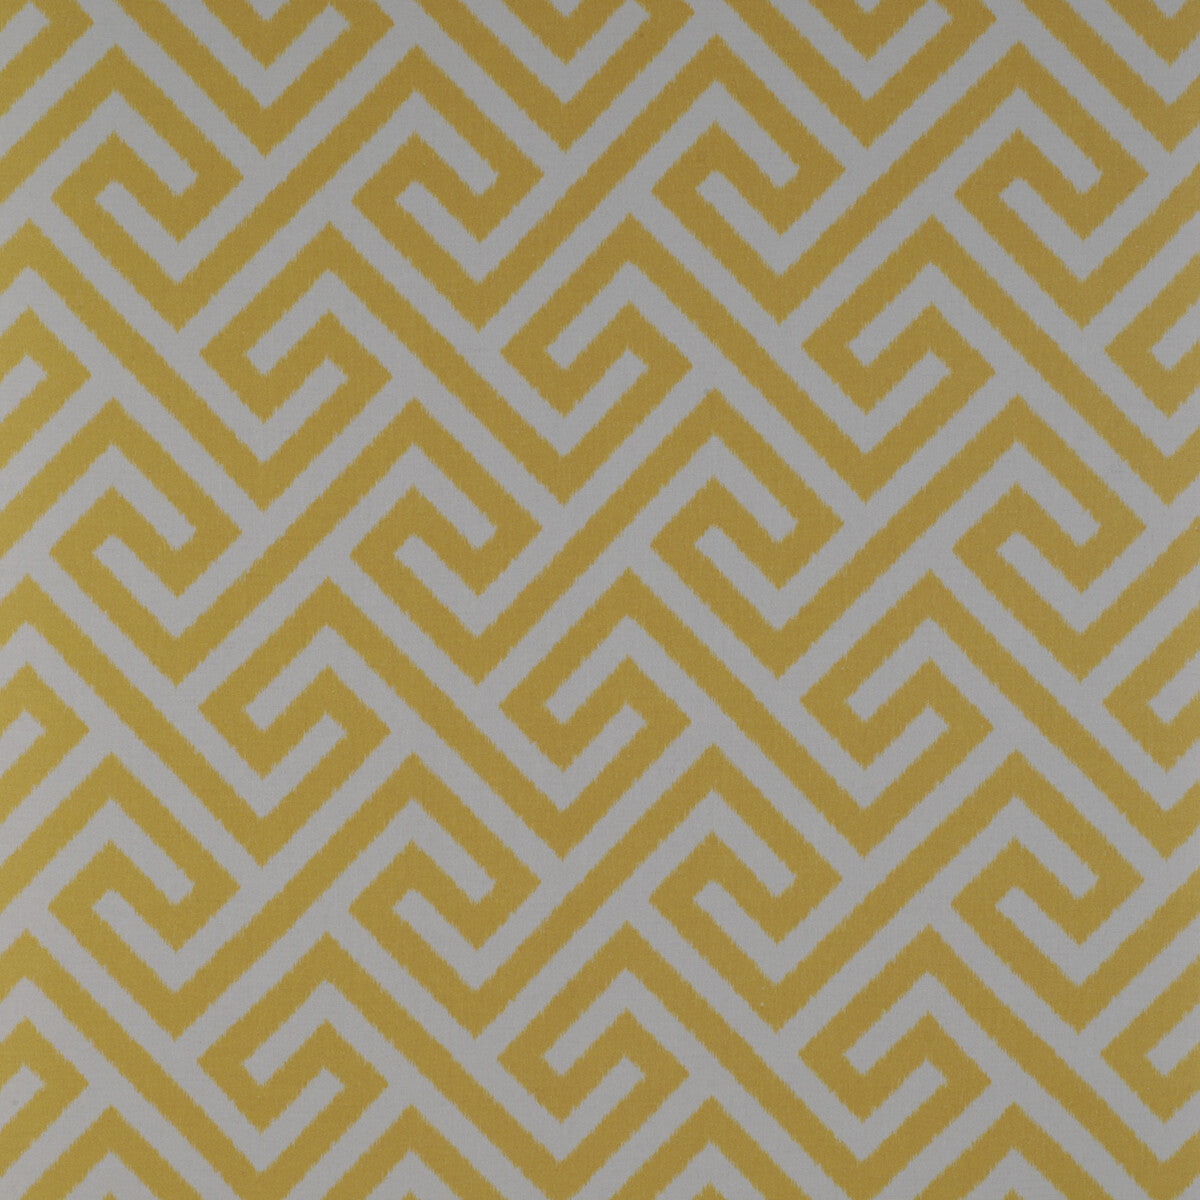 Trevi fabric in amarillo color - pattern GDT5337.006.0 - by Gaston y Daniela in the Tierras collection